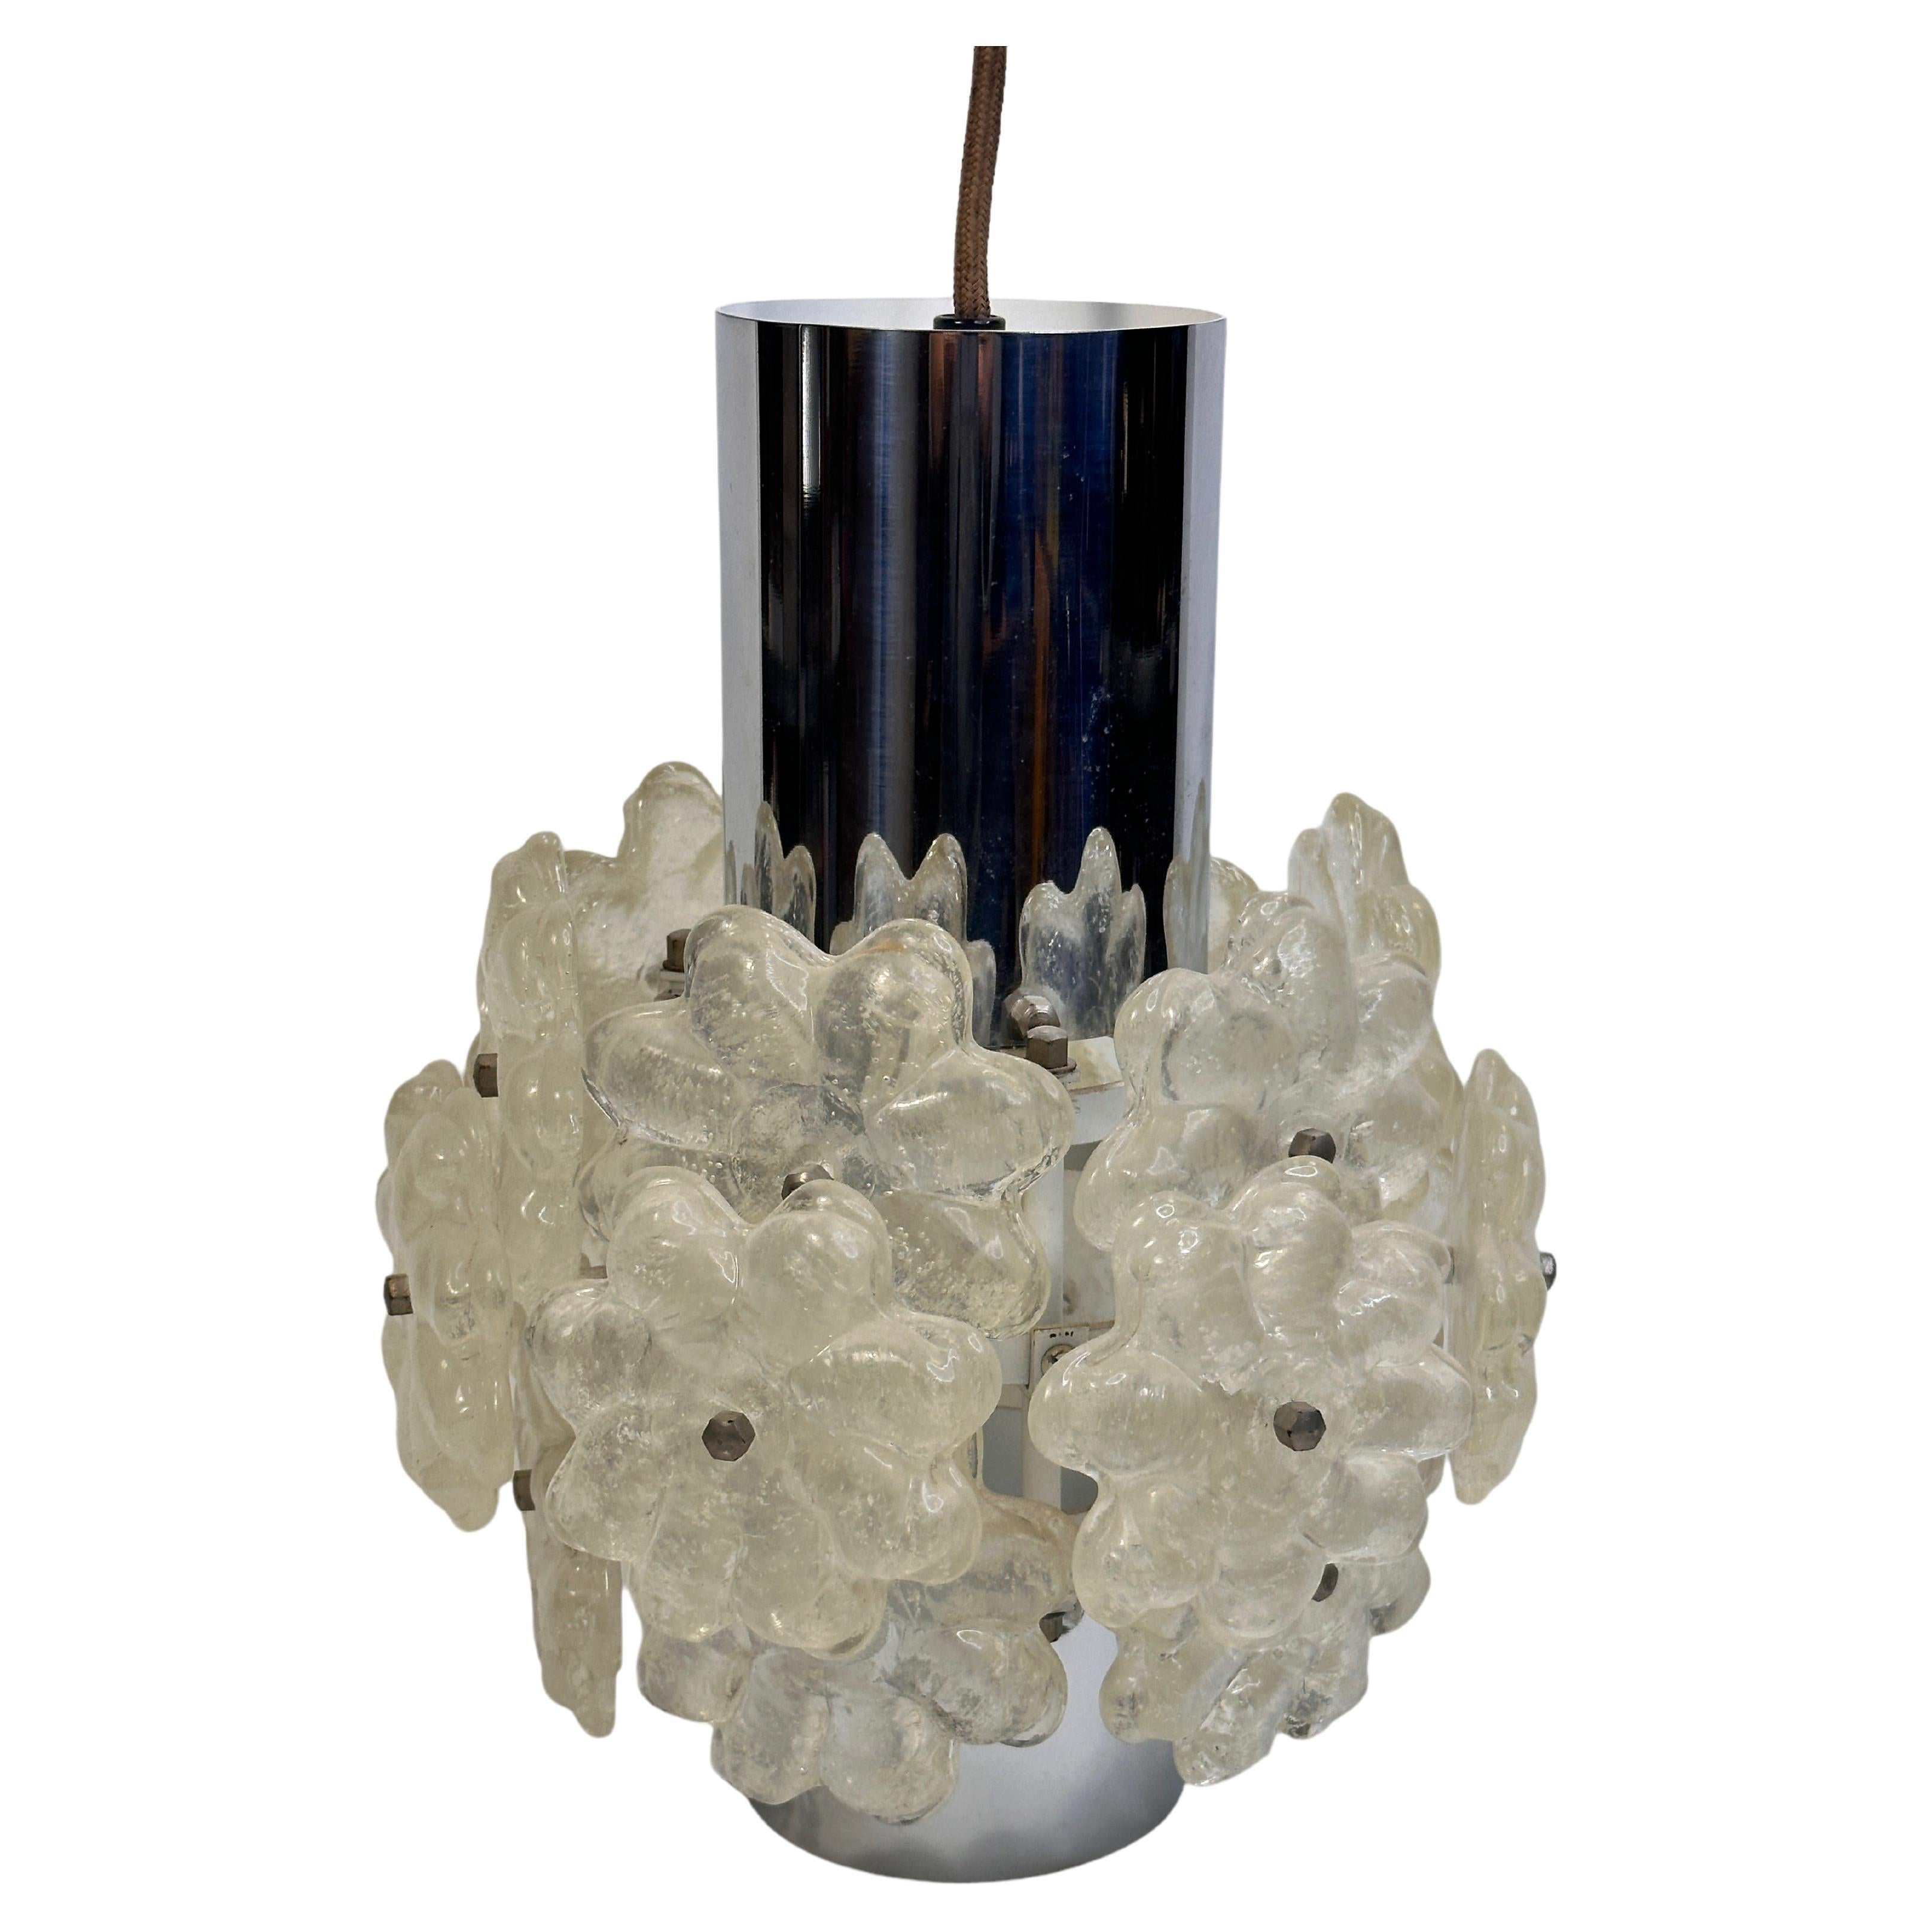 1 of 6 Chrome Pendant Fixture with Lucite Flower Clusters by Kalmar Austria 1960 For Sale